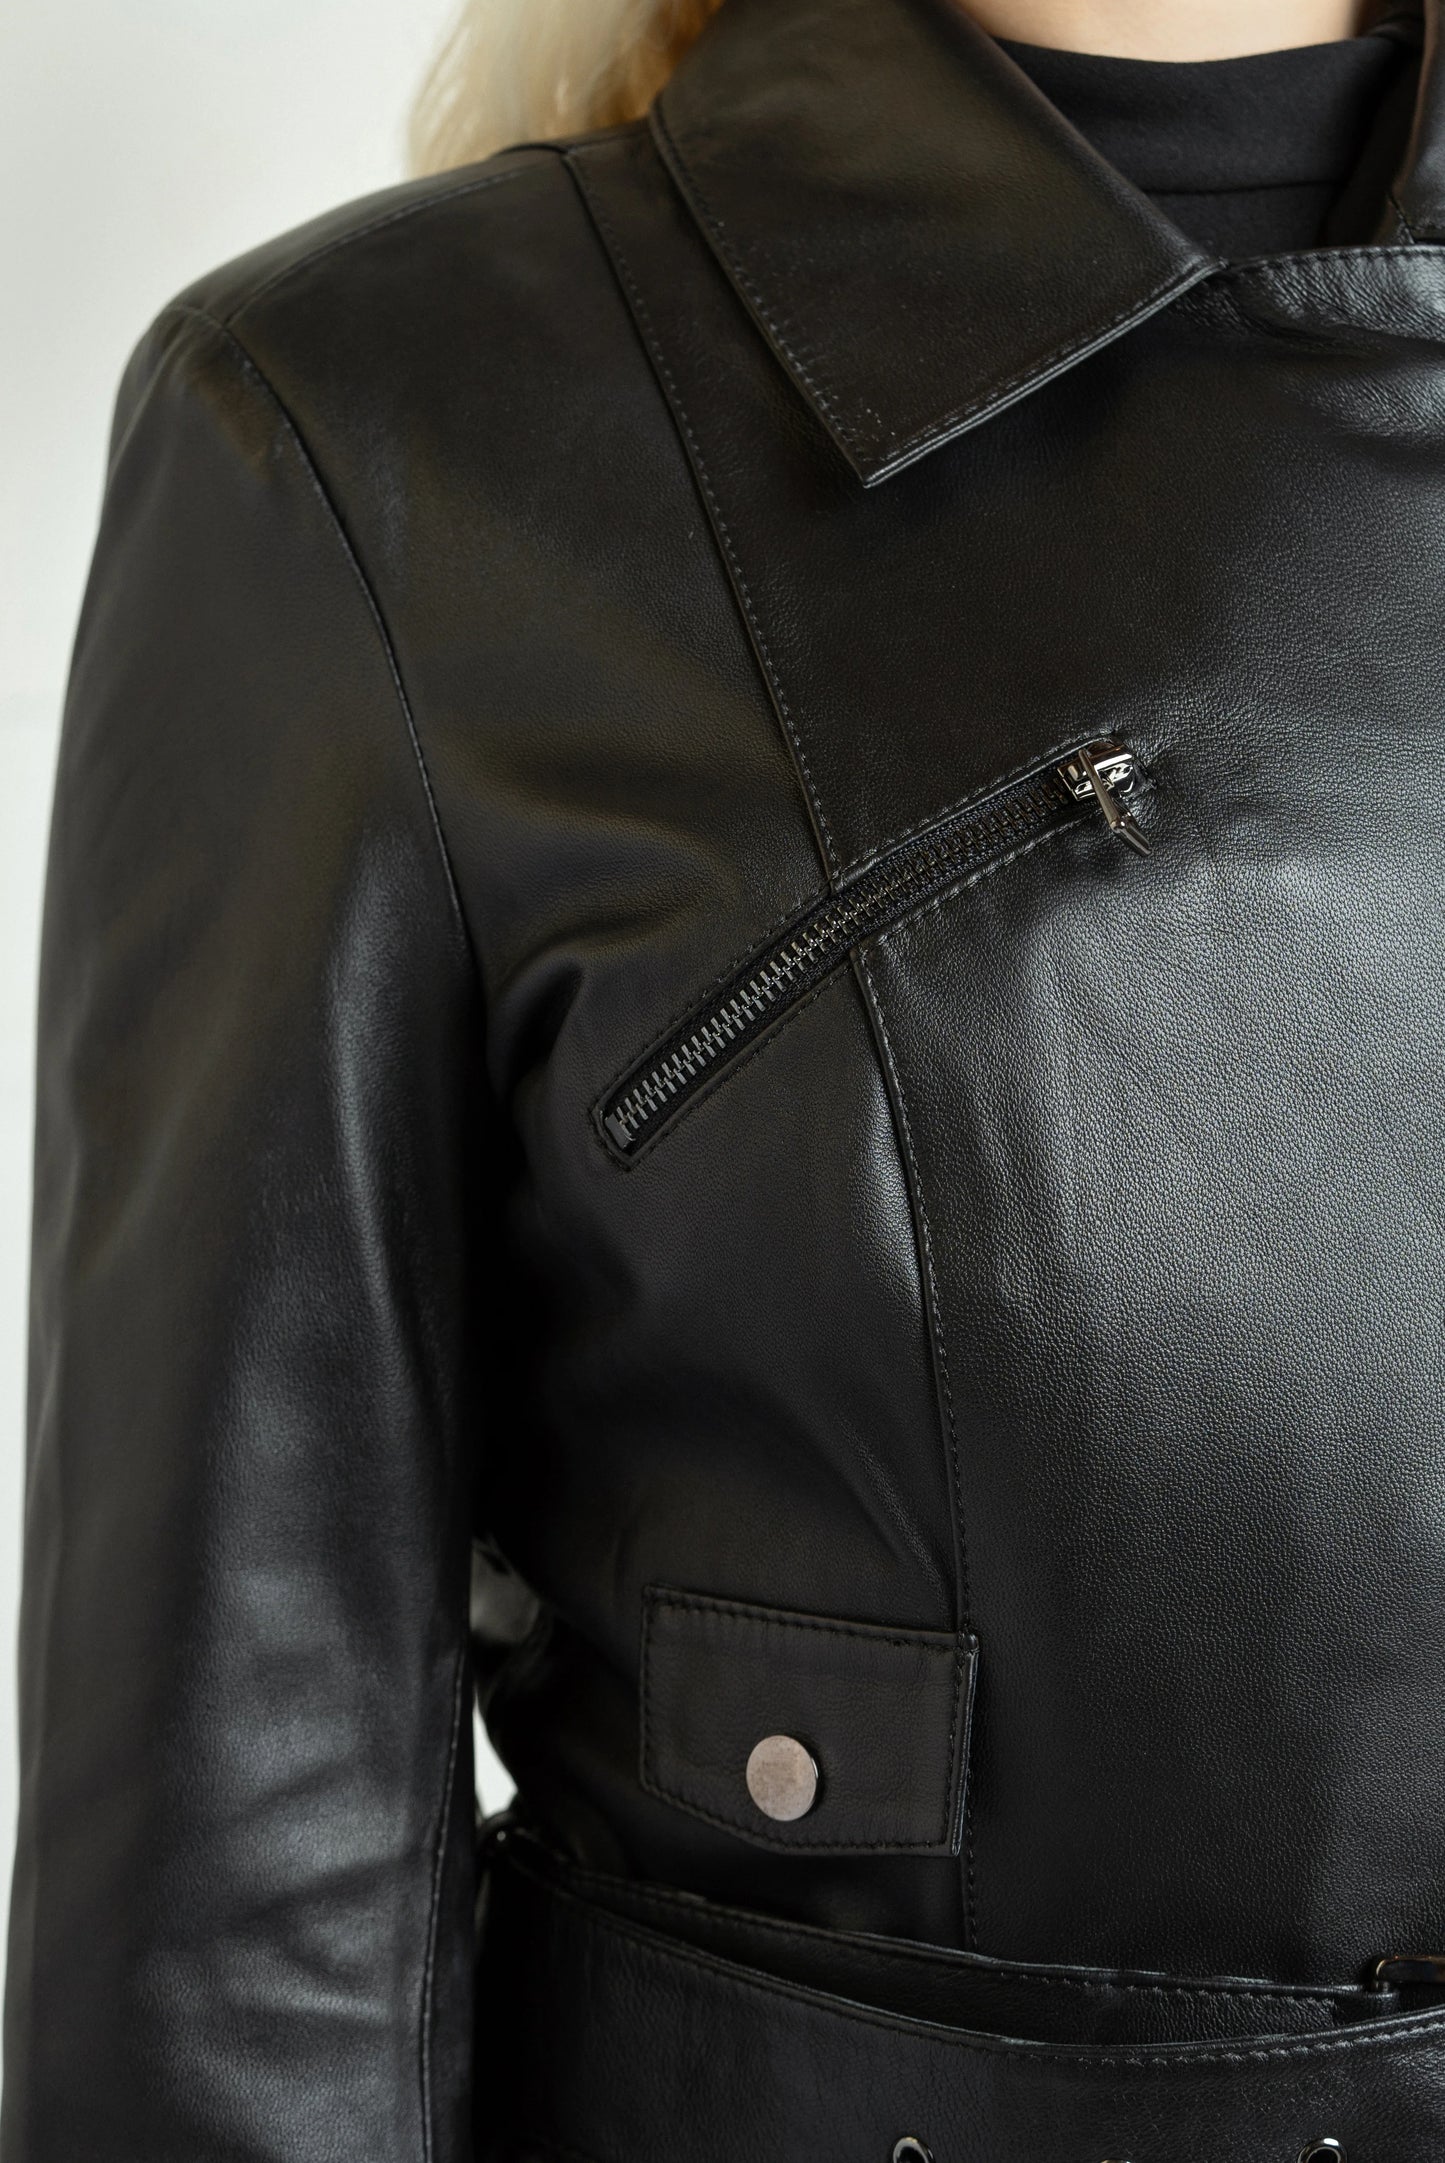 Black Lamb Leather Jacket & Dress Combo with Silver Accents